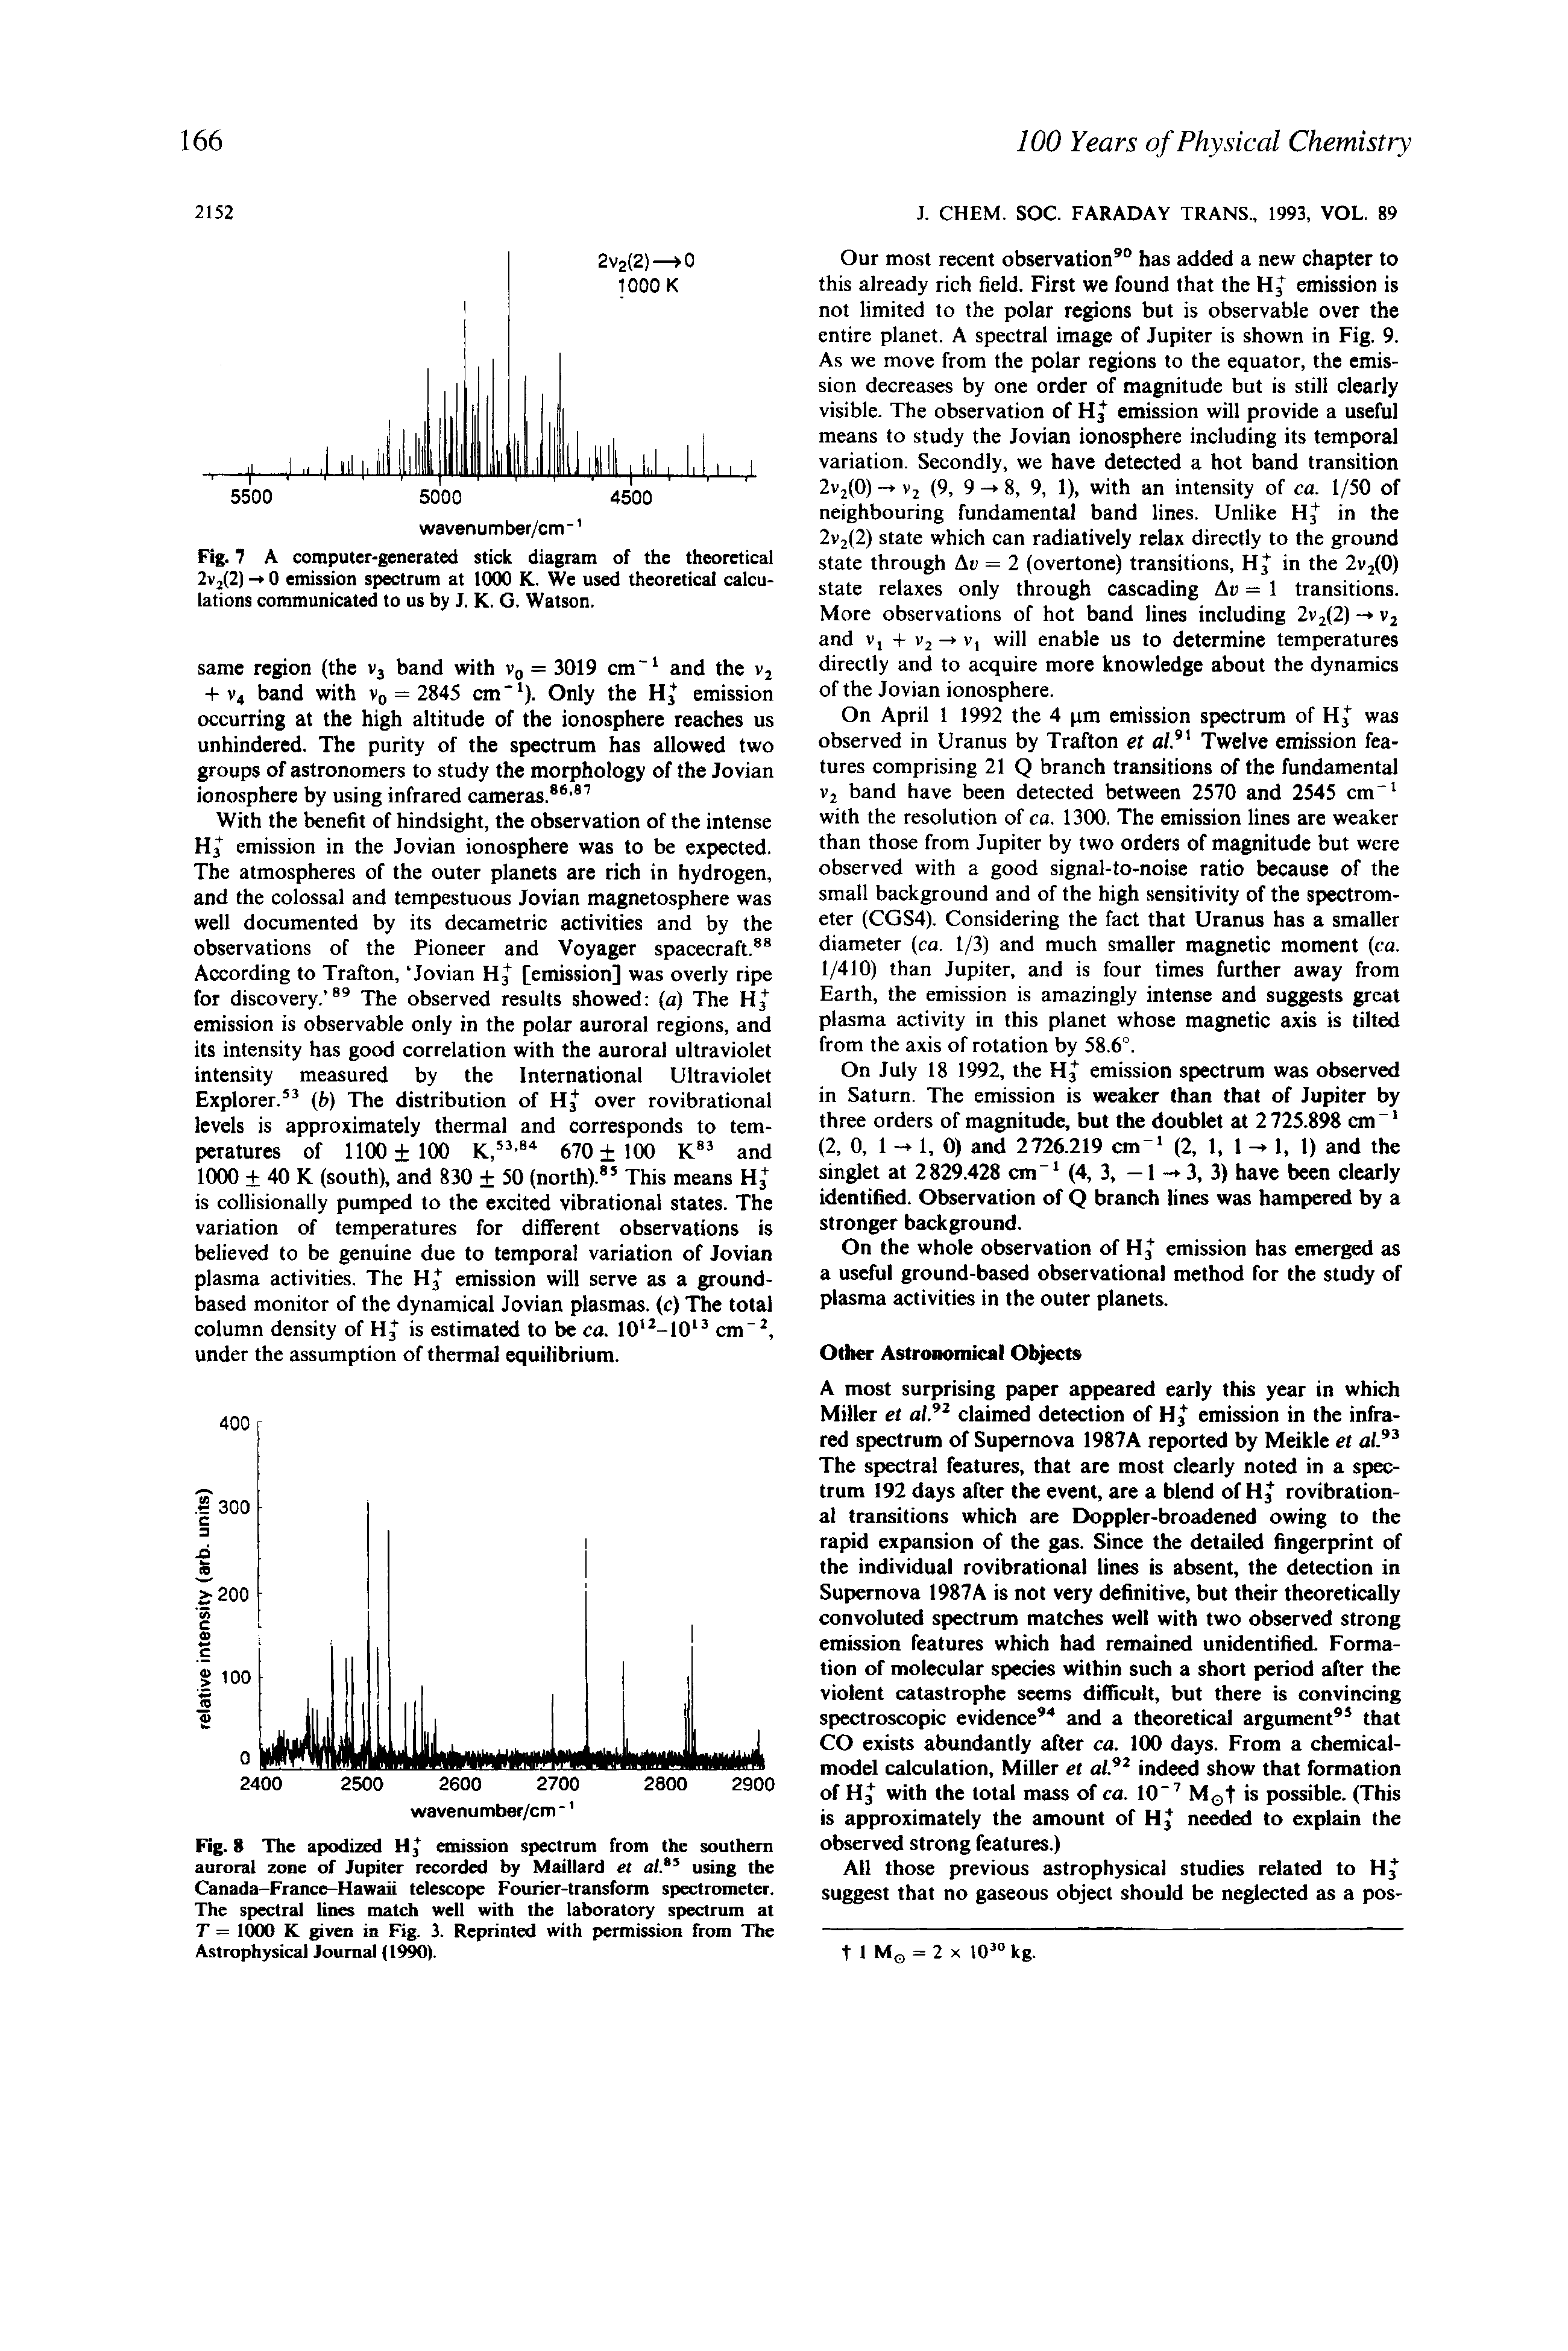 Fig. 8 The apodized H, emission spectrum from the southern auroral zone of Jupiter recorded by Maillard et a/. using the Canada-France-Hawaii telescope Fourier-transform spectrometer. The spectral lines match well with the laboratory spectrum at T = 1000 K given in Fig. 3. Reprinted with permission from The Astrophysical Journal (1990).